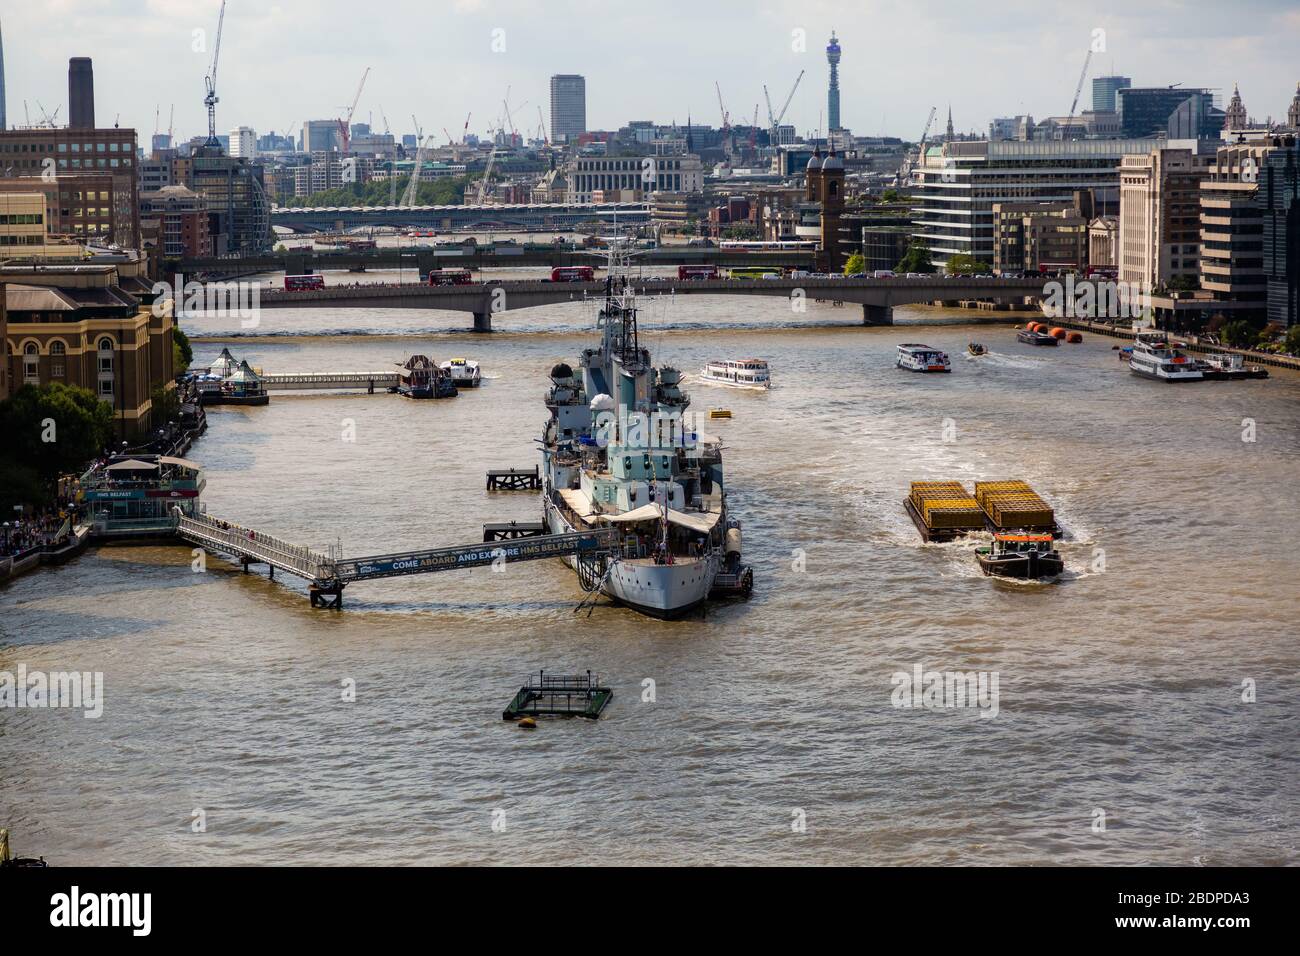 The Town-class light cruiser H.M.S. Belfast that is moored on the Thames River and serves as a Museum Ship operated by the Imperial War Museum. Stock Photo